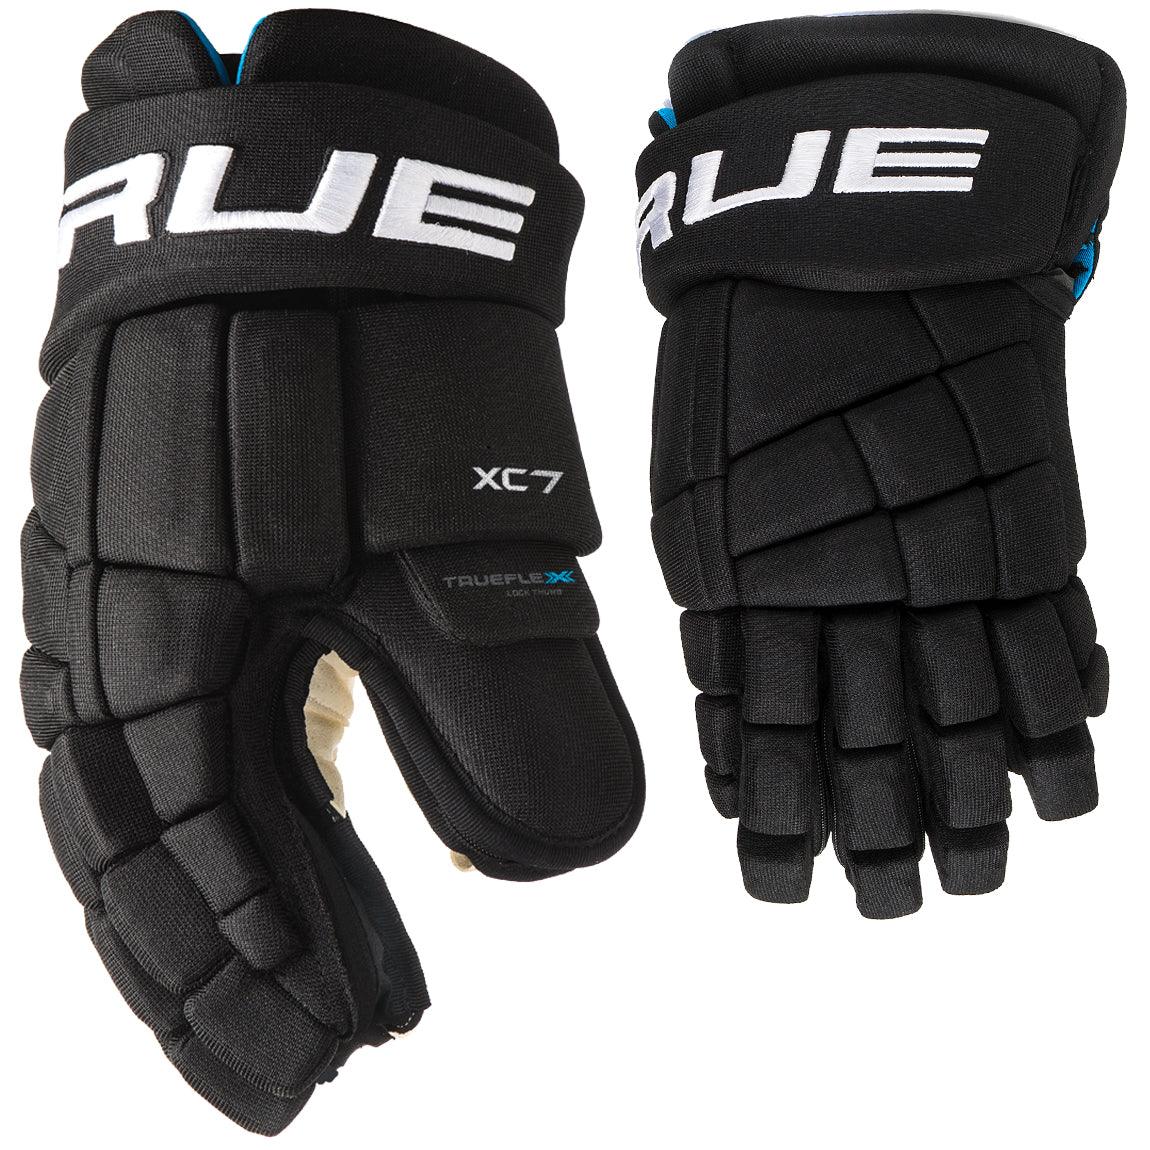 XC7 Hockey Gloves - Junior - Sports Excellence